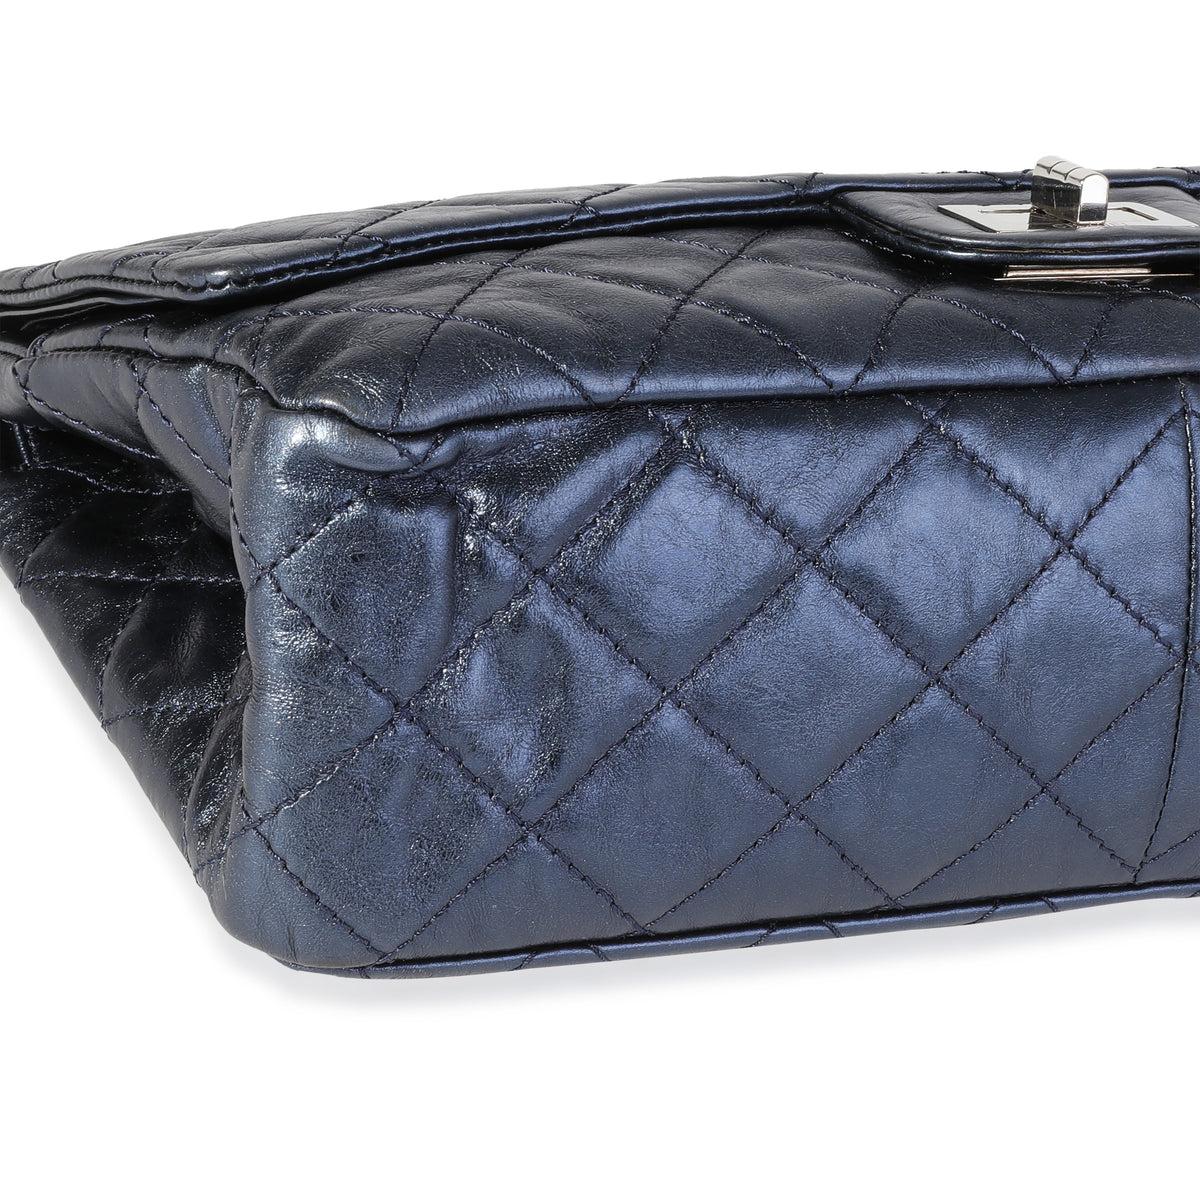 Chanel Metallic Blue Quilted Aged Calfskin Reissue 2.55 227 Double